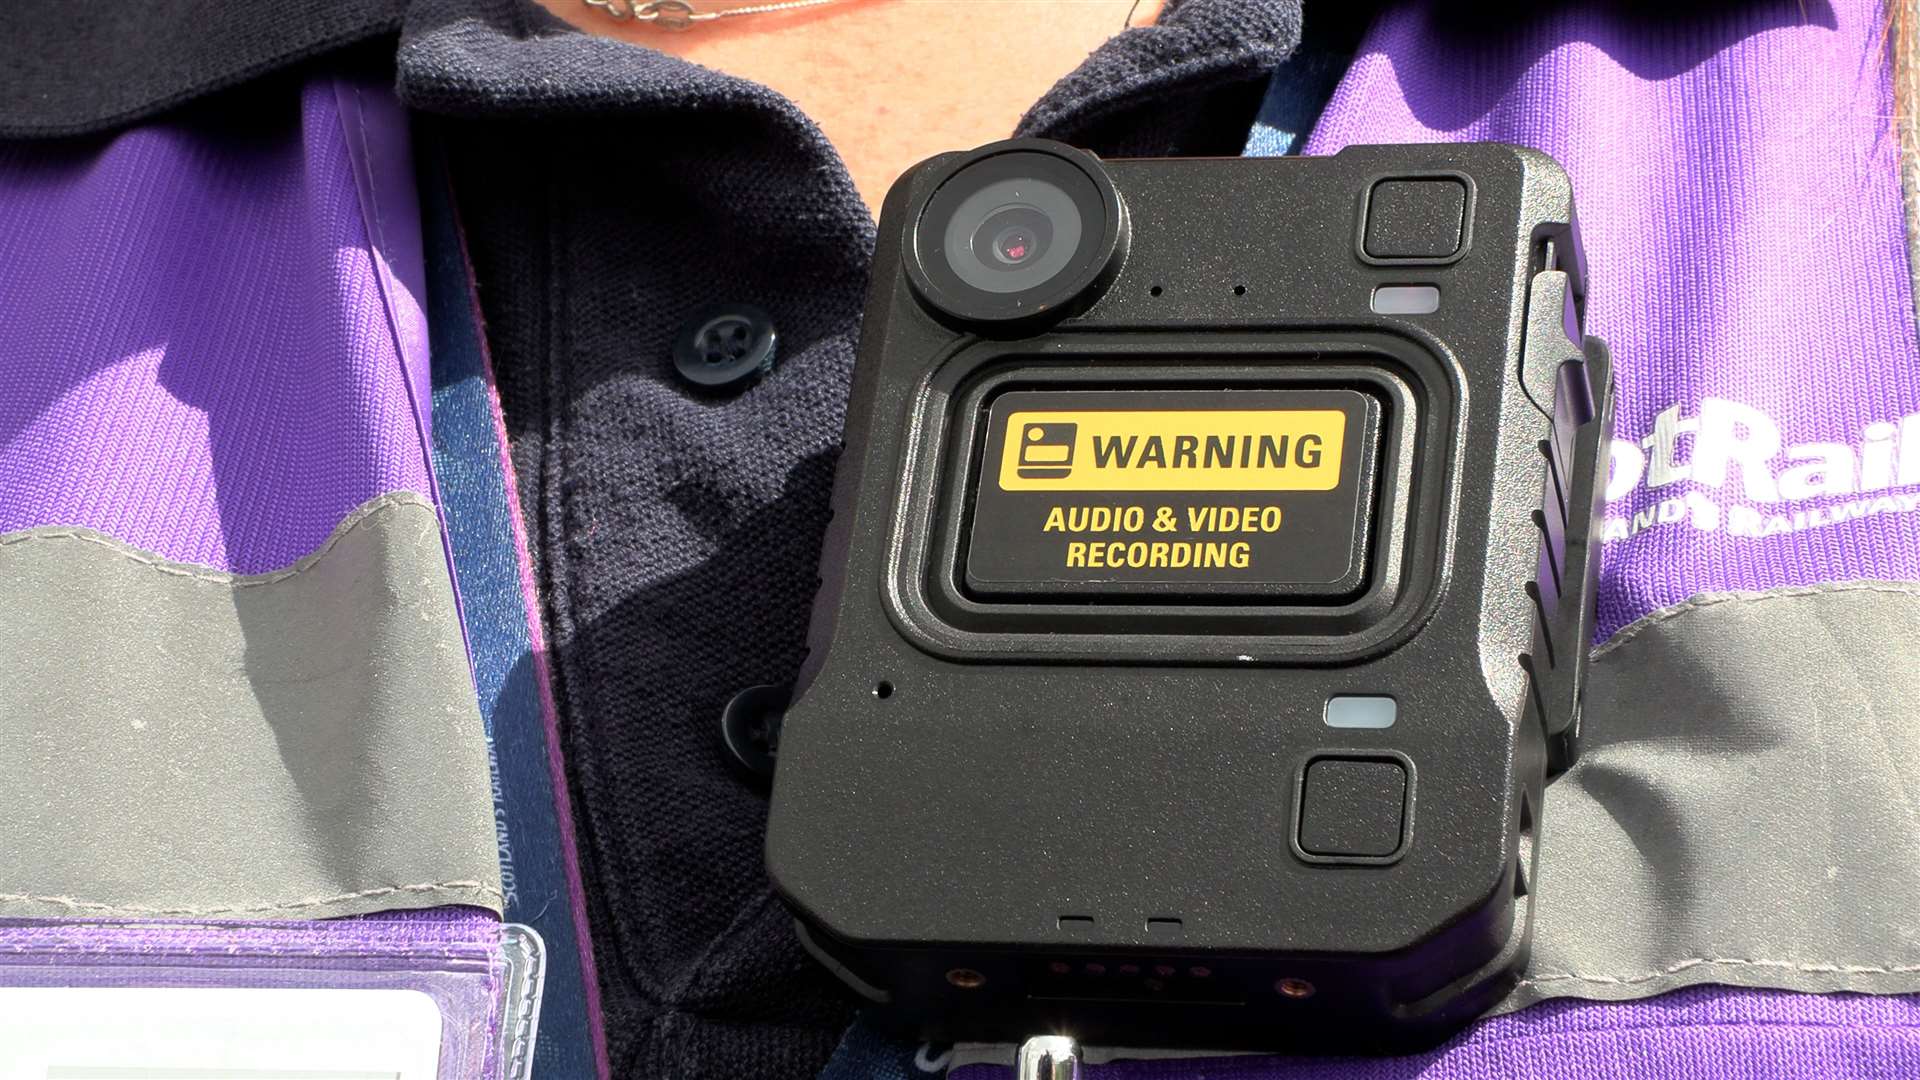 Security body worn camera that train staff will be wearing. Picture supplied